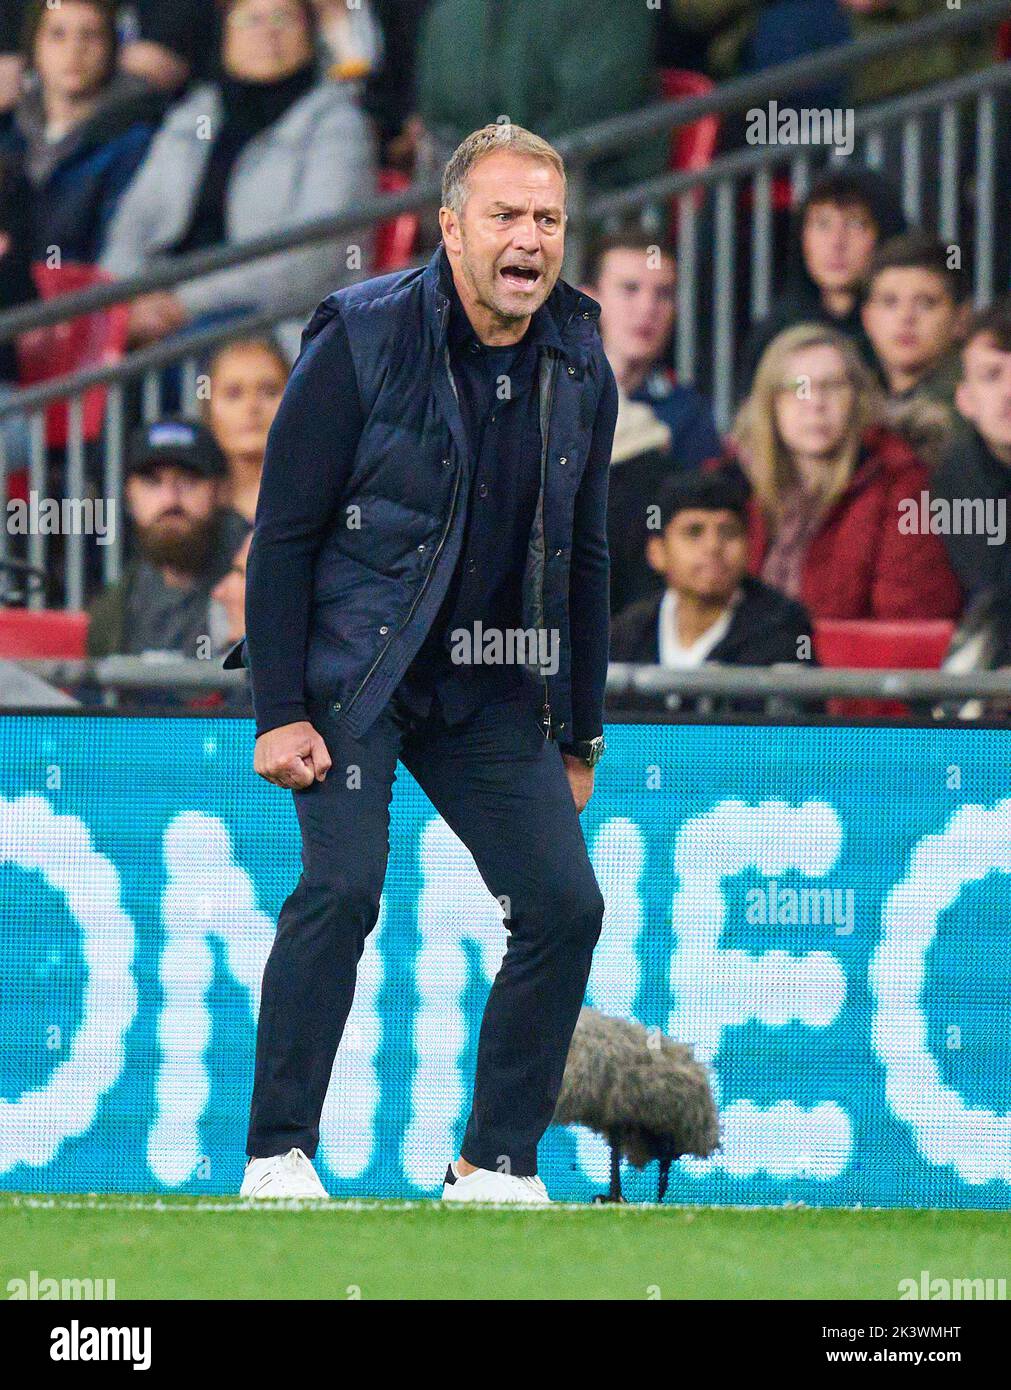 DFB headcoach Hans-Dieter Hansi Flick , Bundestrainer, Nationaltrainer,  in the UEFA Nations League 2022 match  ENGLAND - GERMANY   in Season 2022/2023 on Sept 26, 2022  in London, Great Britain.  © Peter Schatz / Alamy Live News Stock Photo